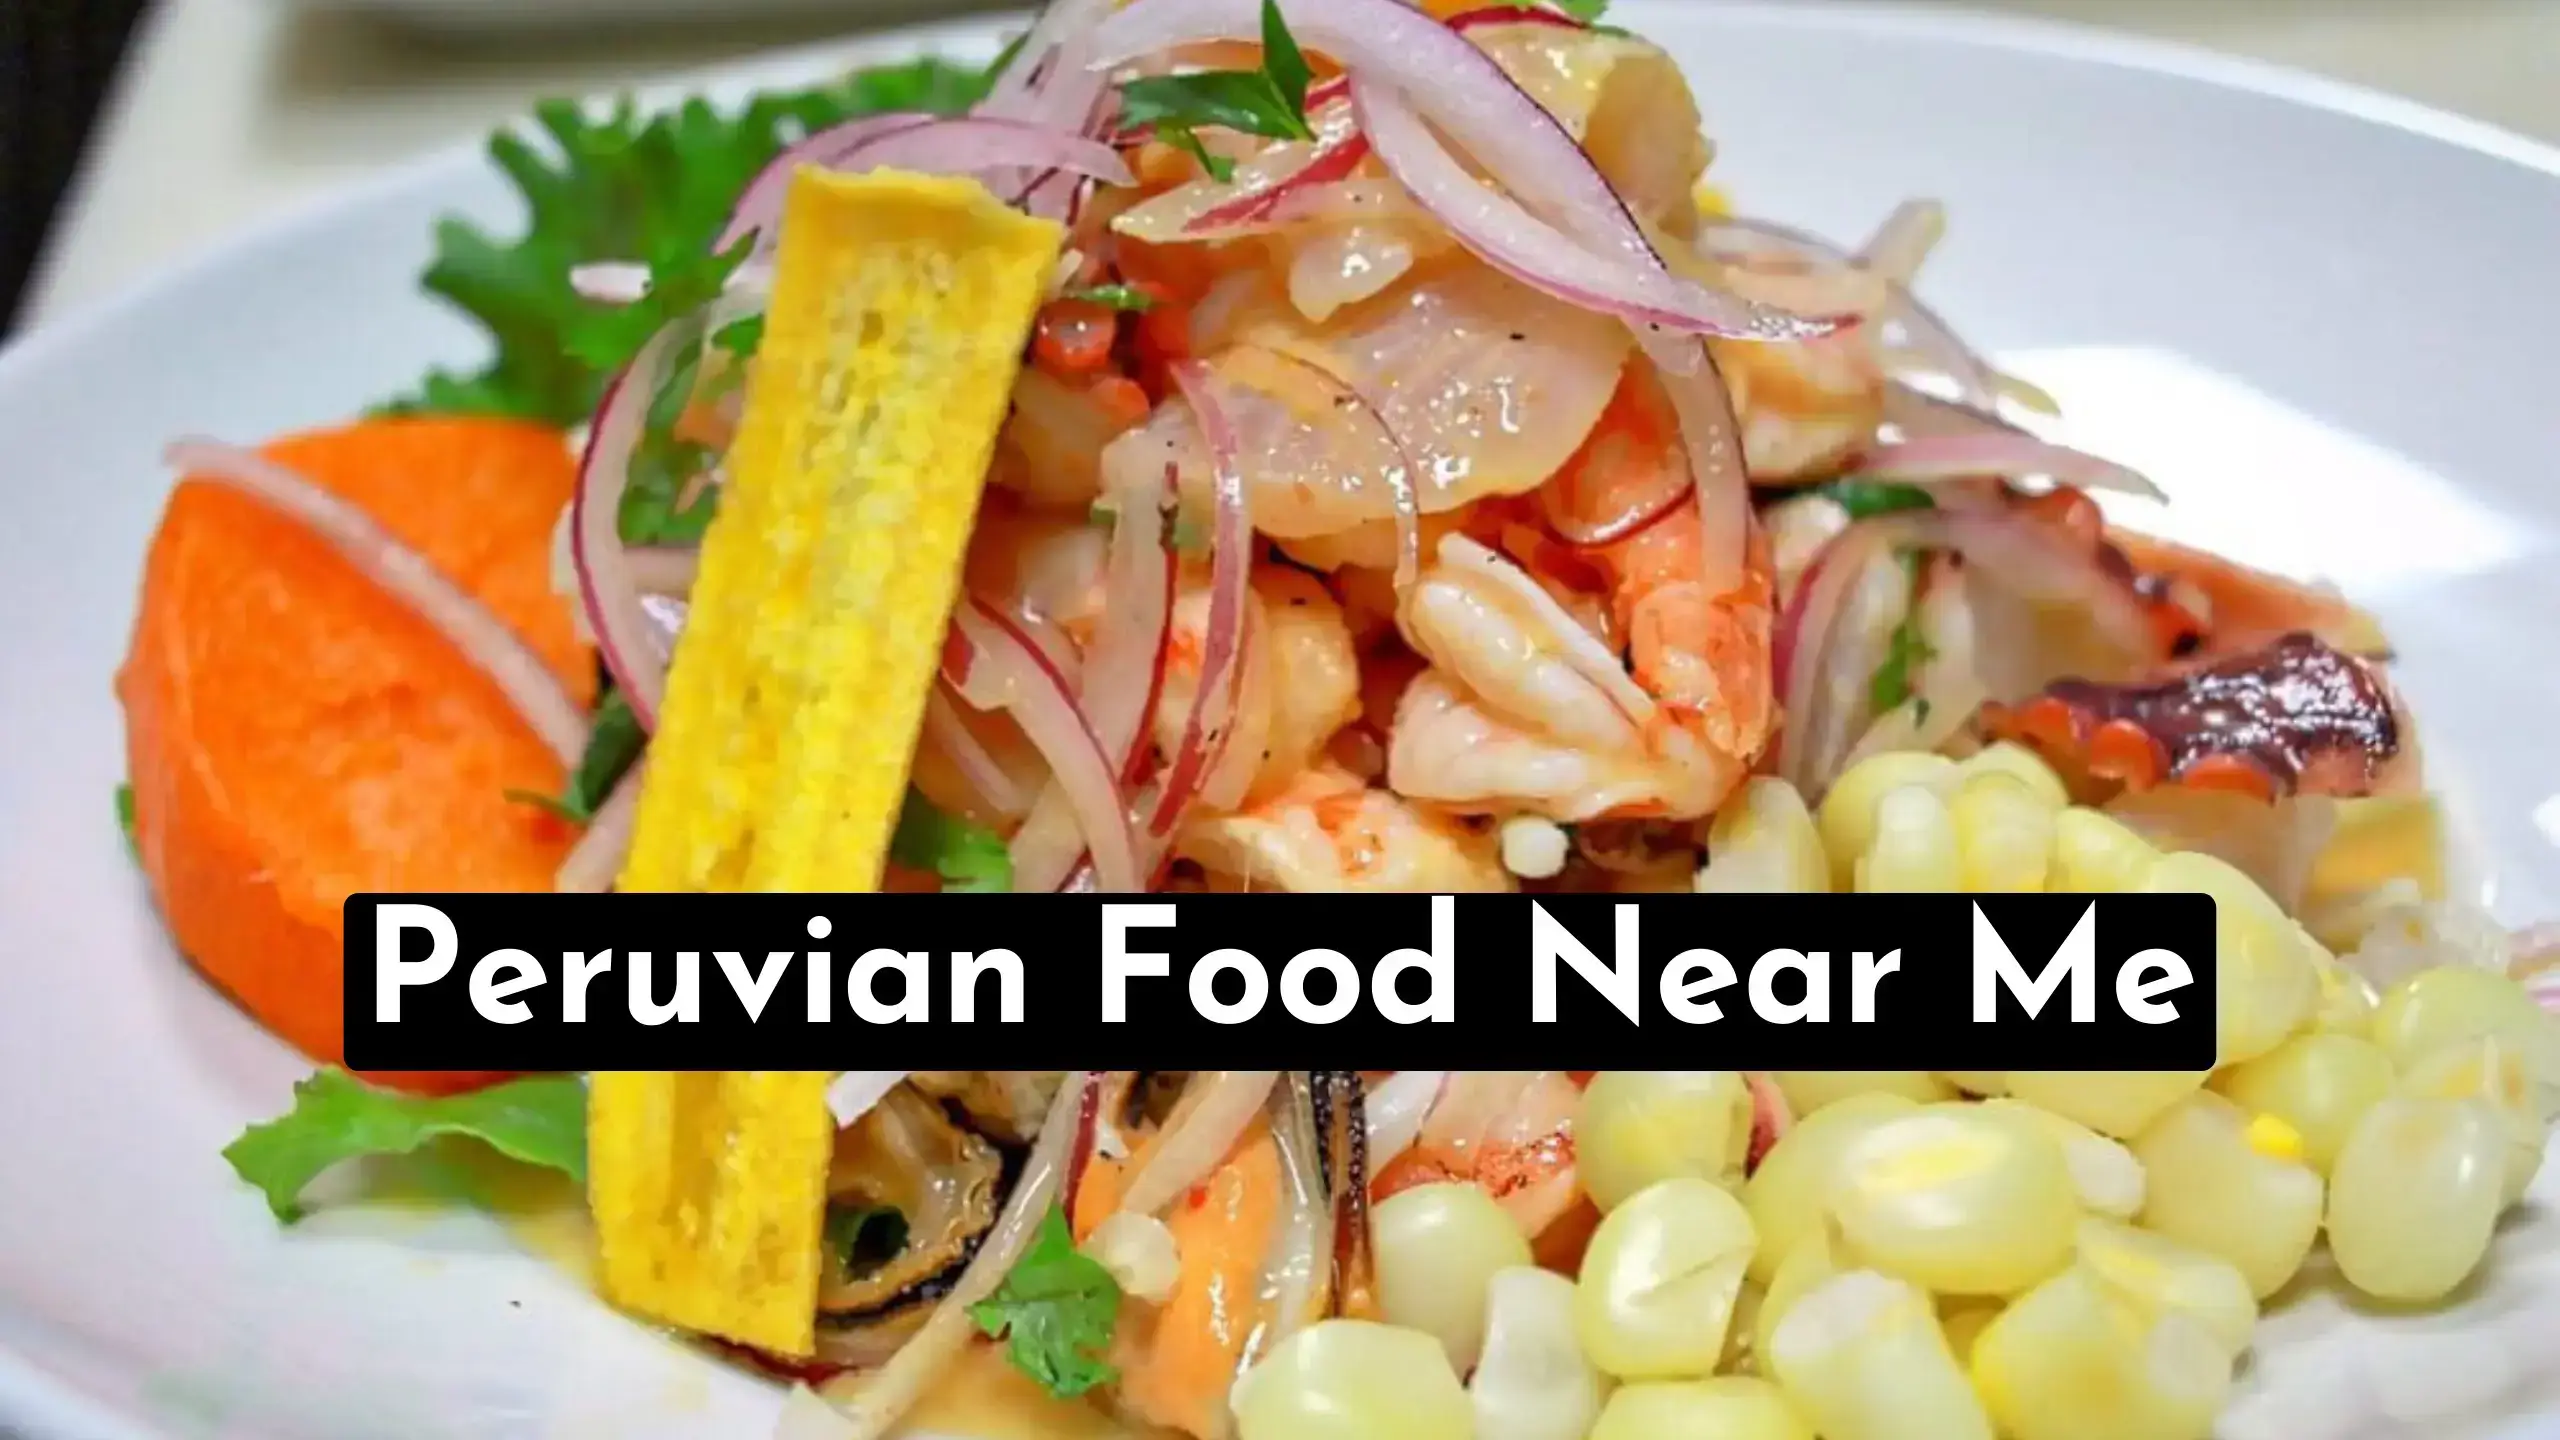 A Quick Guide To Find Peruvian Food Near Me | Also Find Best Resturant To Eat Peruvian Food Near To You With Top Recommendation For Dishes.